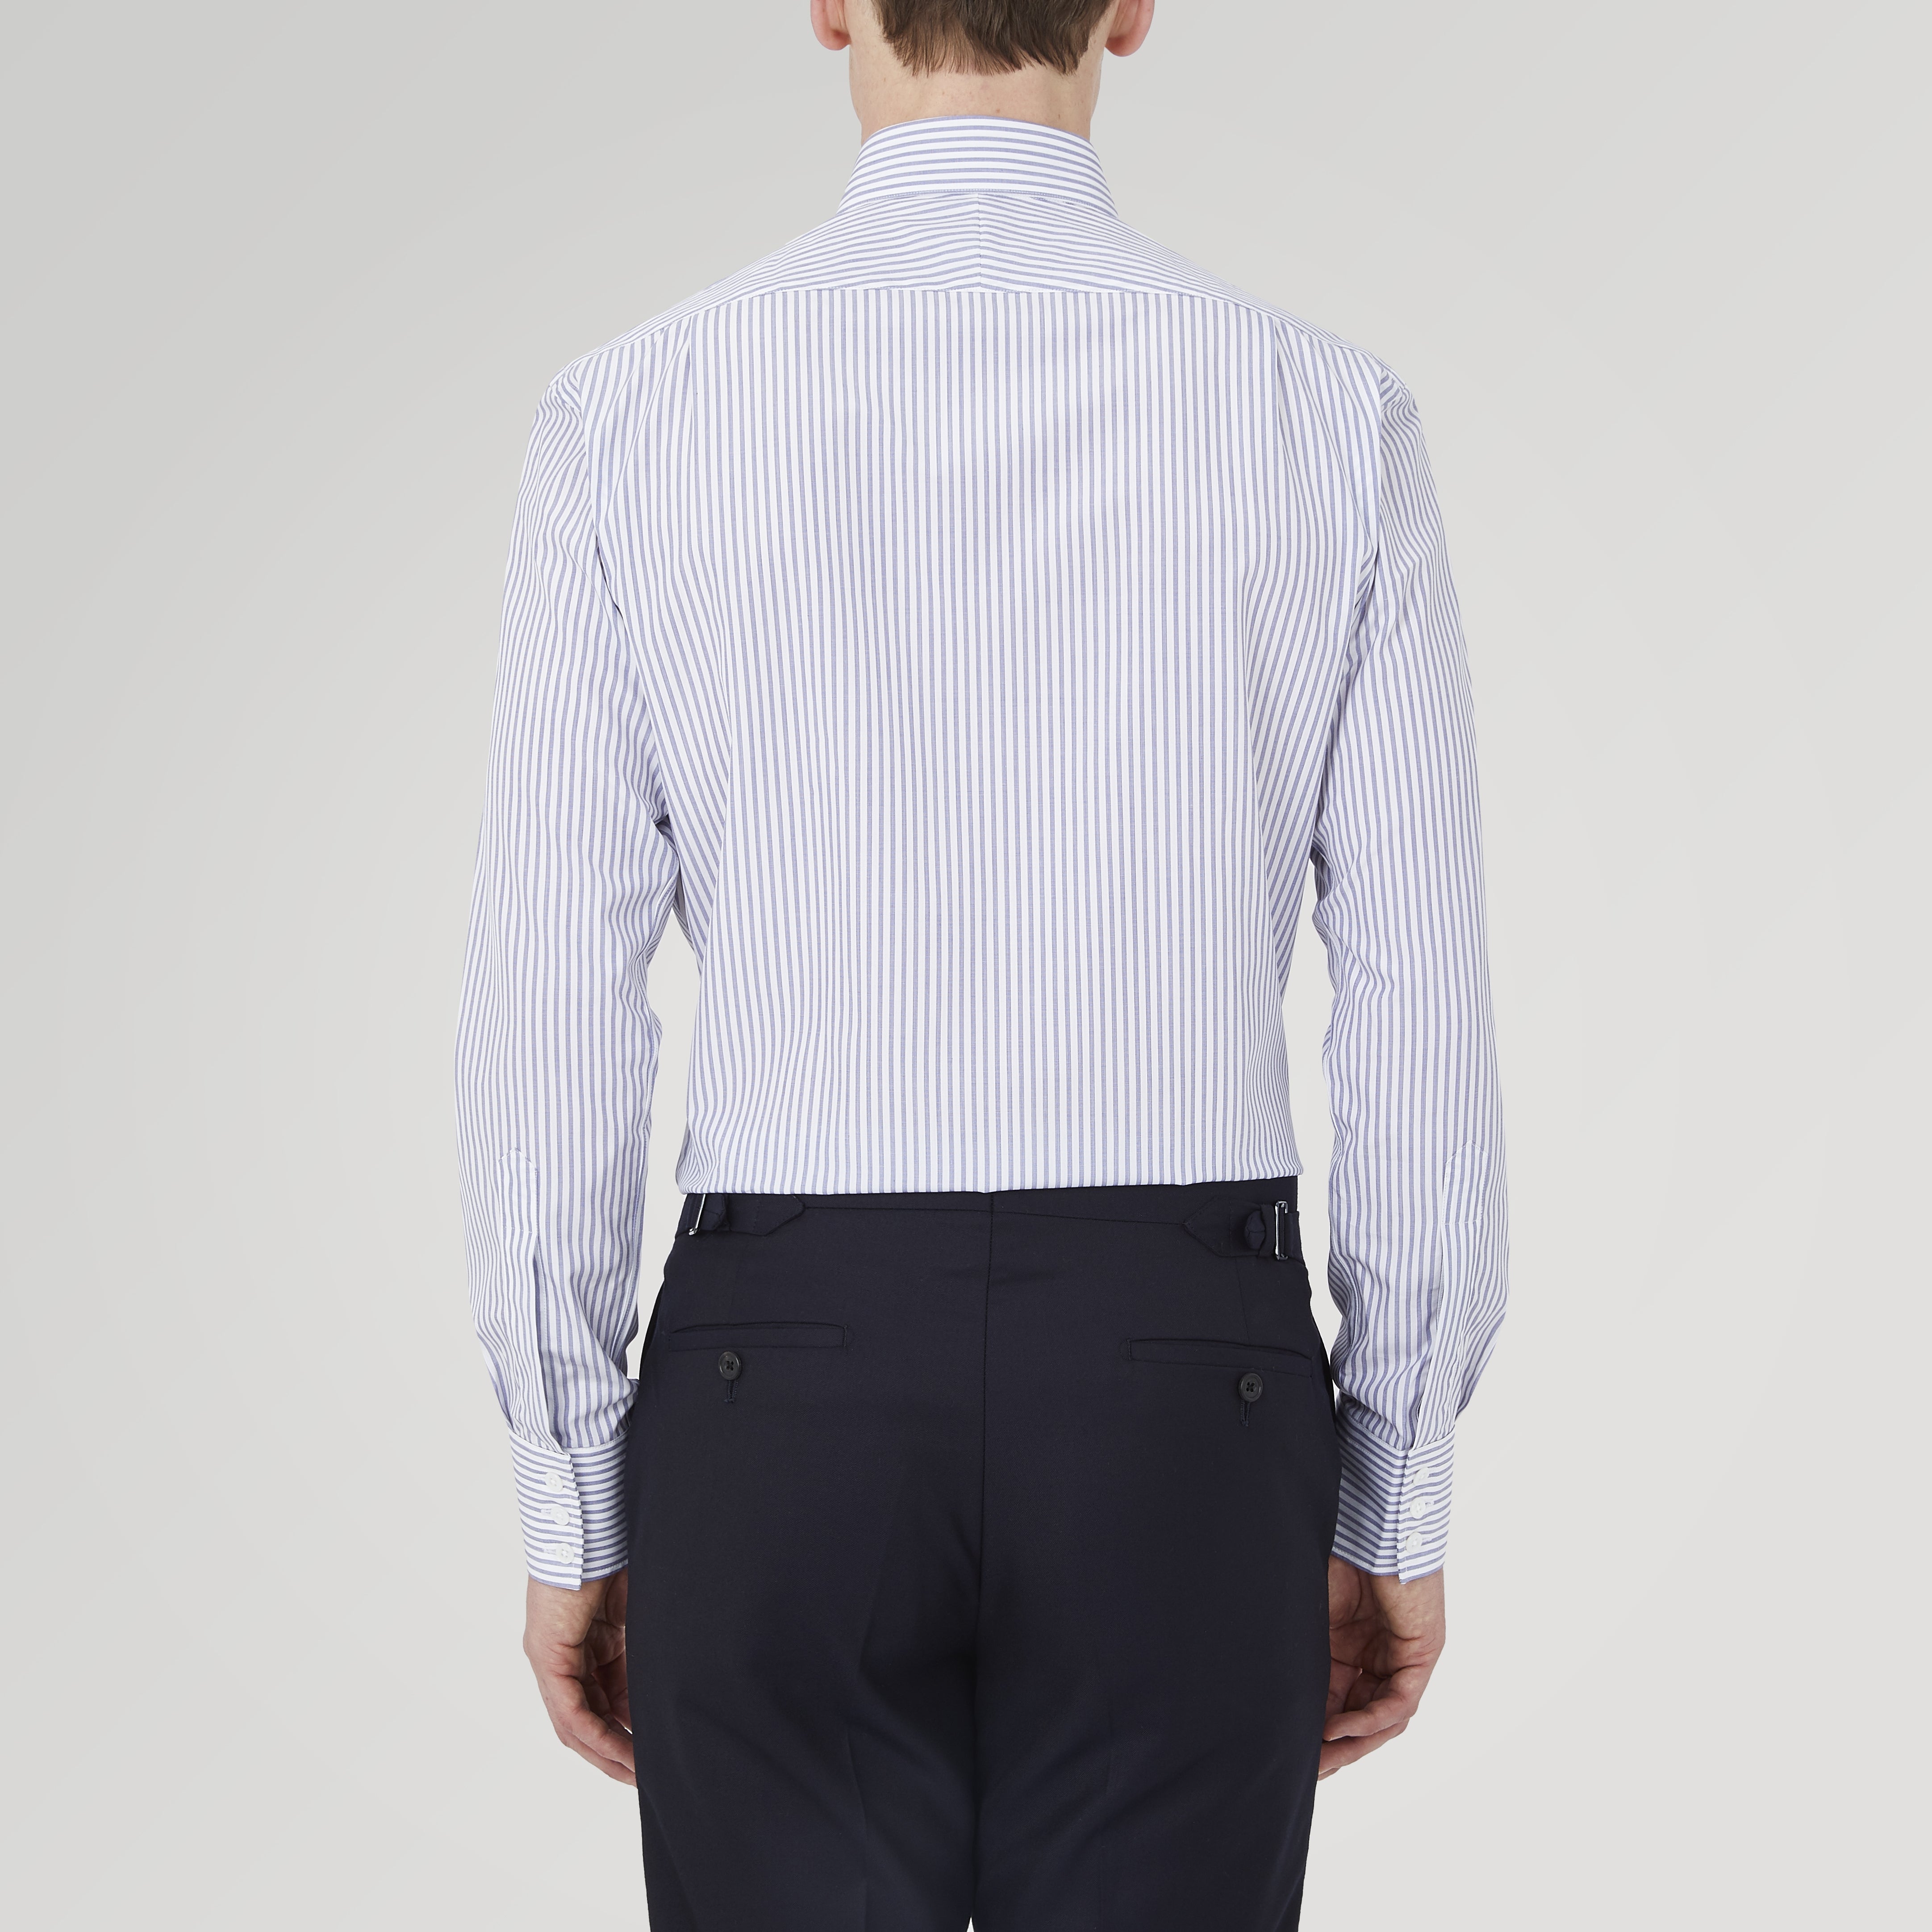 Tailored Fit Blue and White Stripe Sea Island Quality Cotton Shirt with Bury Collar and 3-Button Cuffs